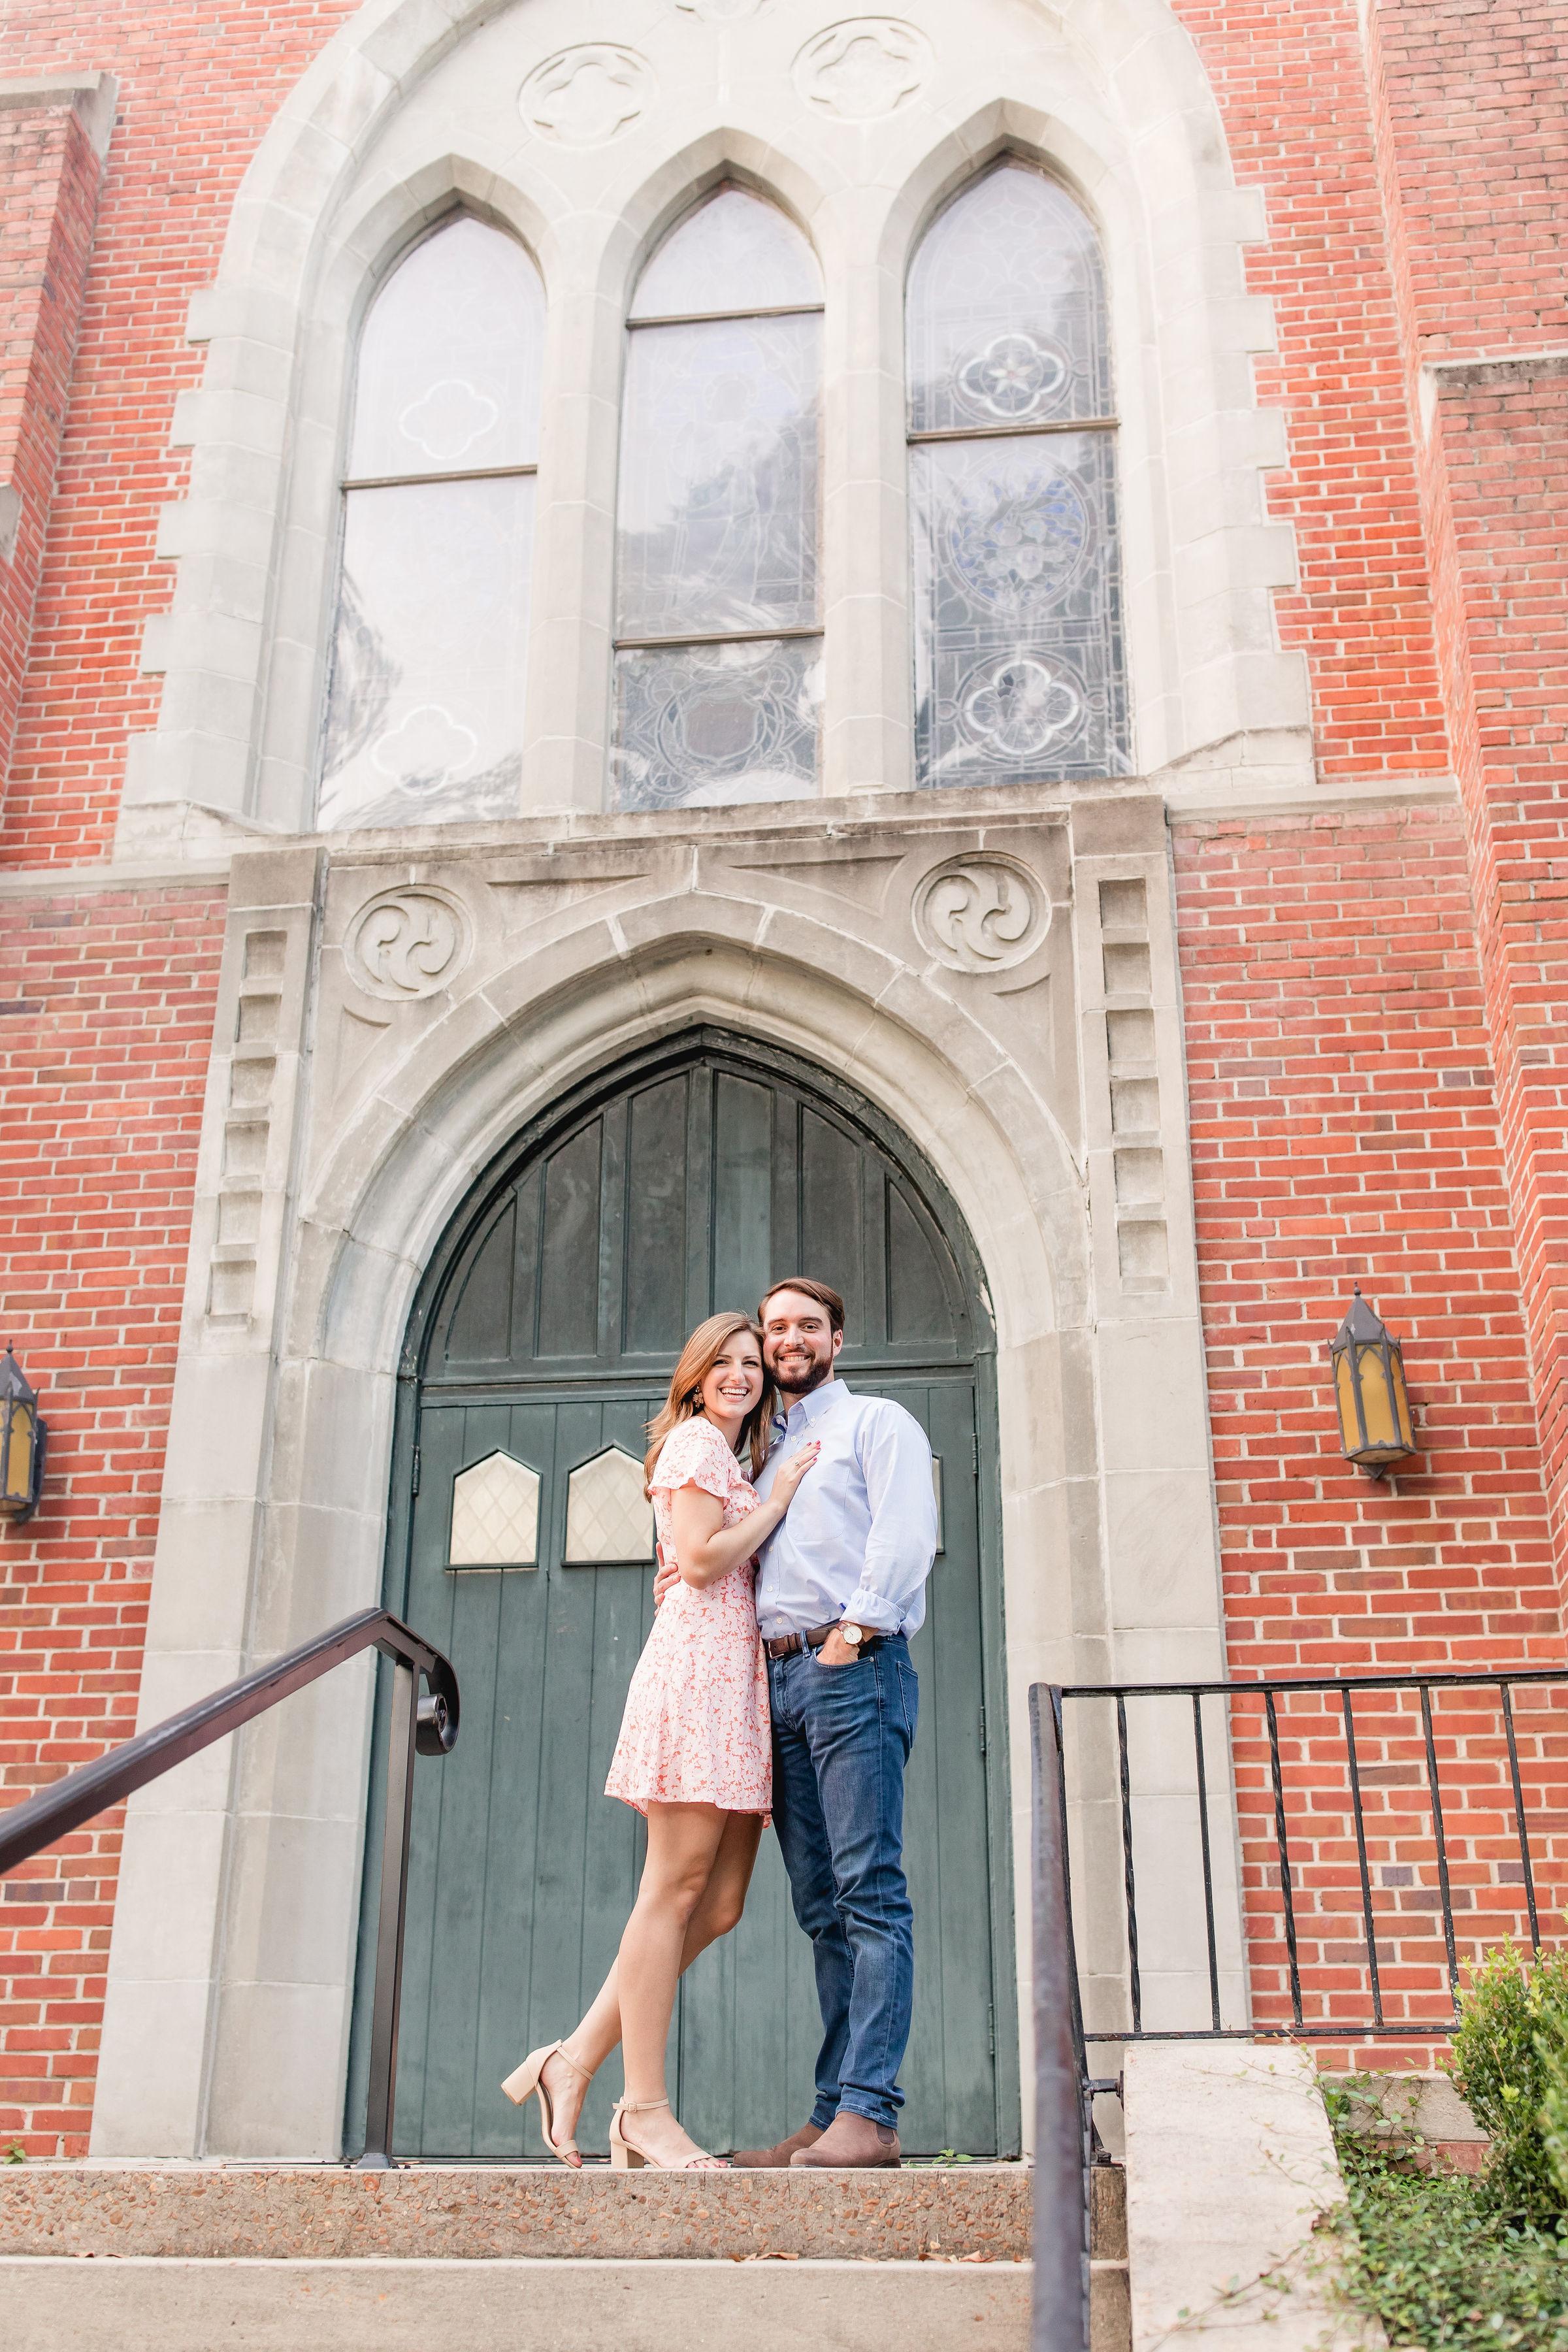 The Wedding Website of Emily Wasson and William Teer